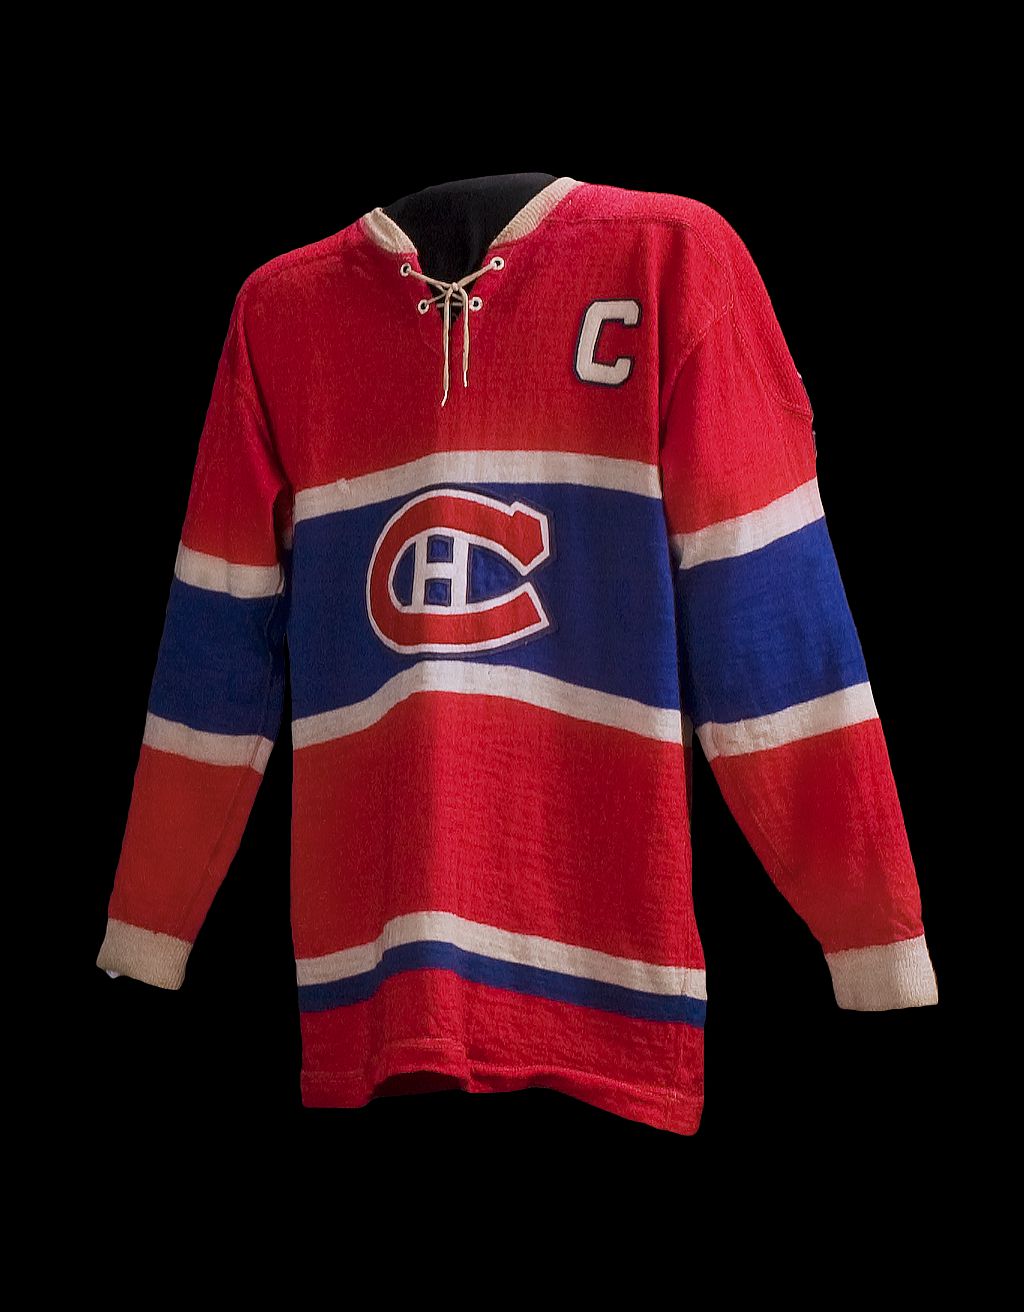 Montreal Canadiens captain’s jersey